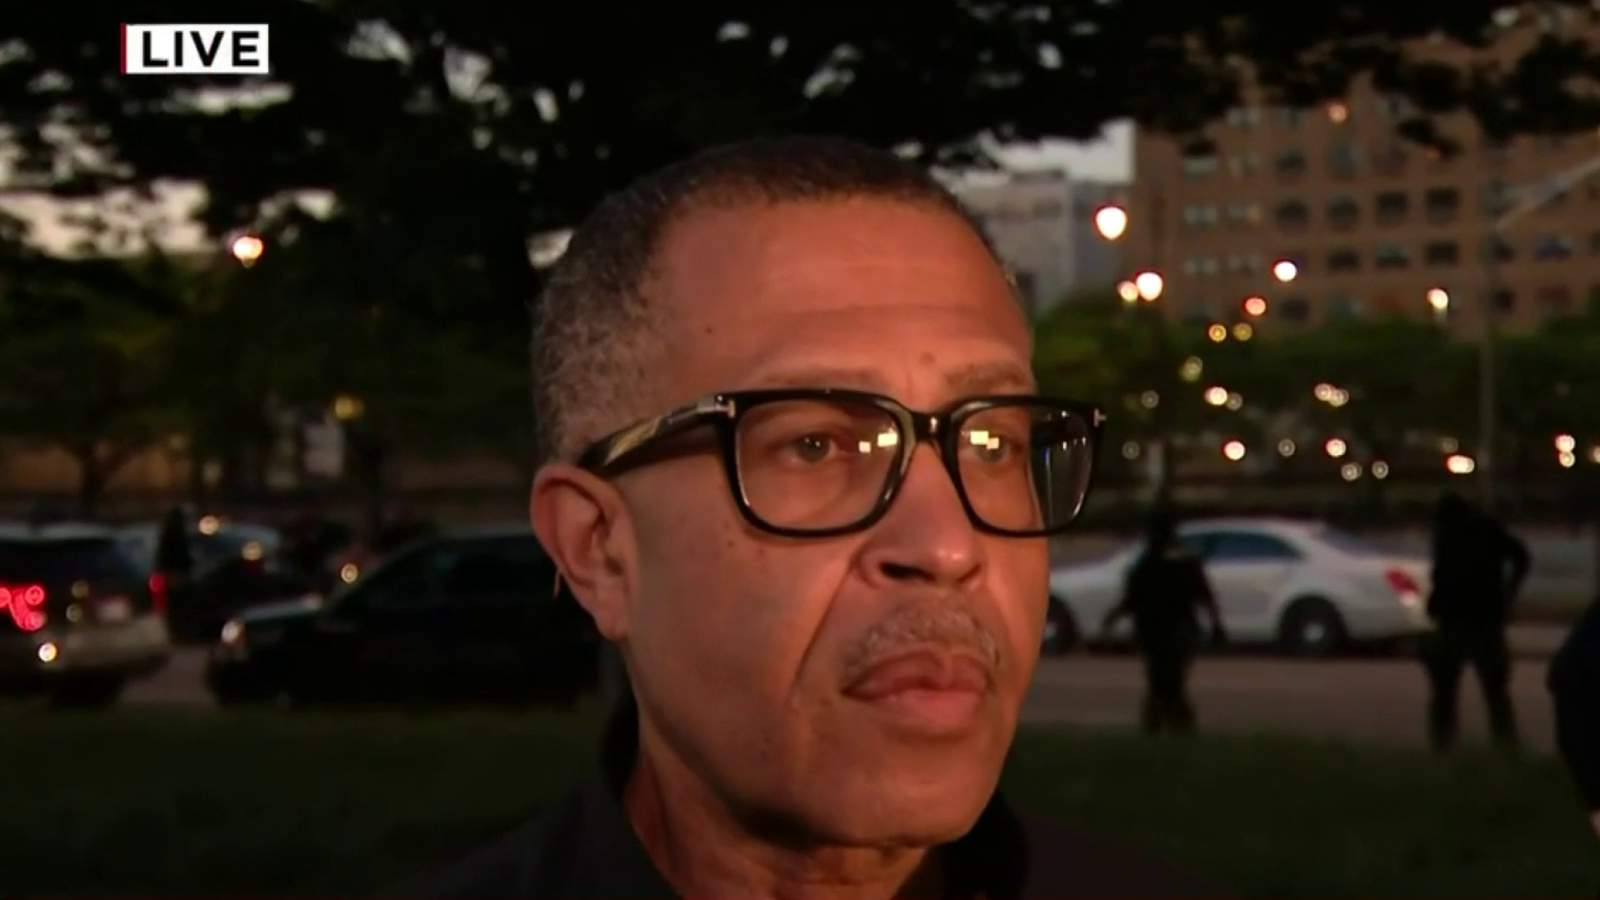 Detroit police chief addresses third night of protests over killing of George Floyd